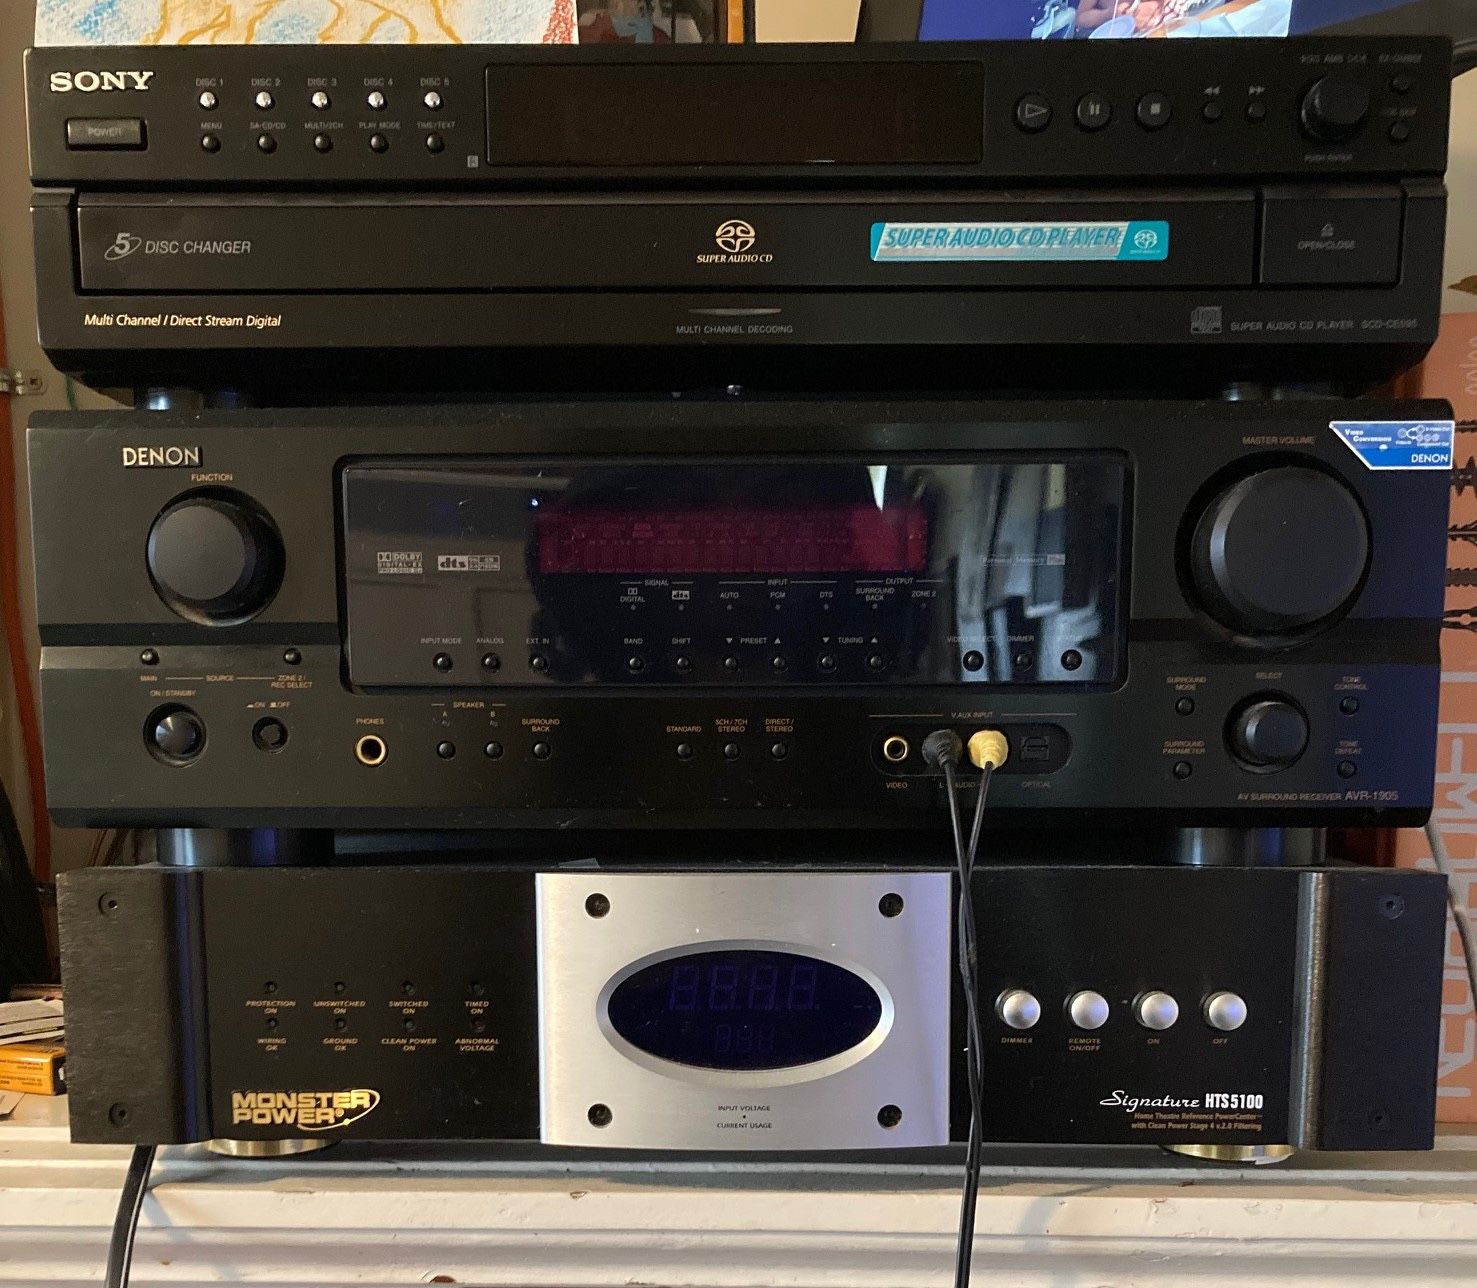 Denon Receiver And Sony 5 Disc Changer